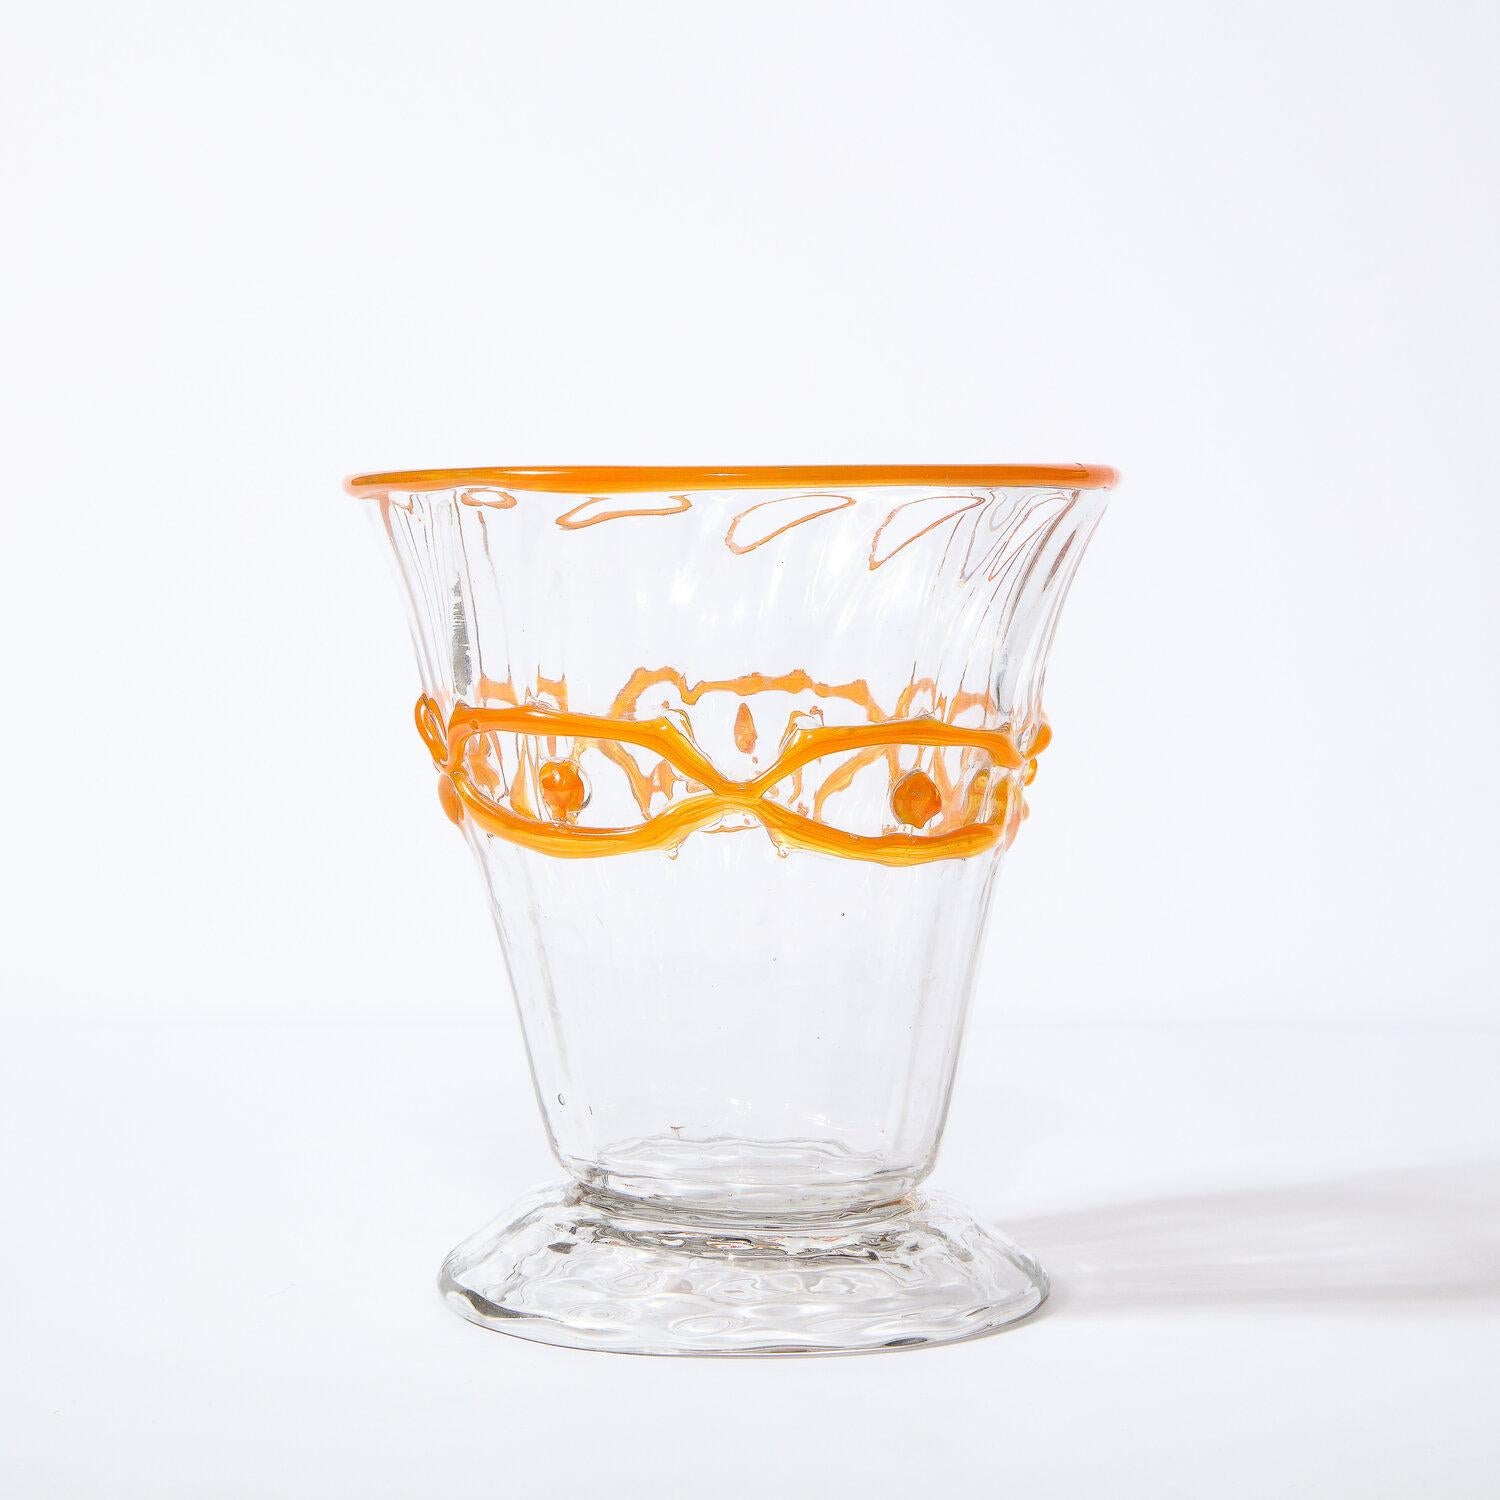 Early 20th Century Art Deco Translucent Glass Vase w/ Tangerine Accents in Relief Signed Daum Nancy